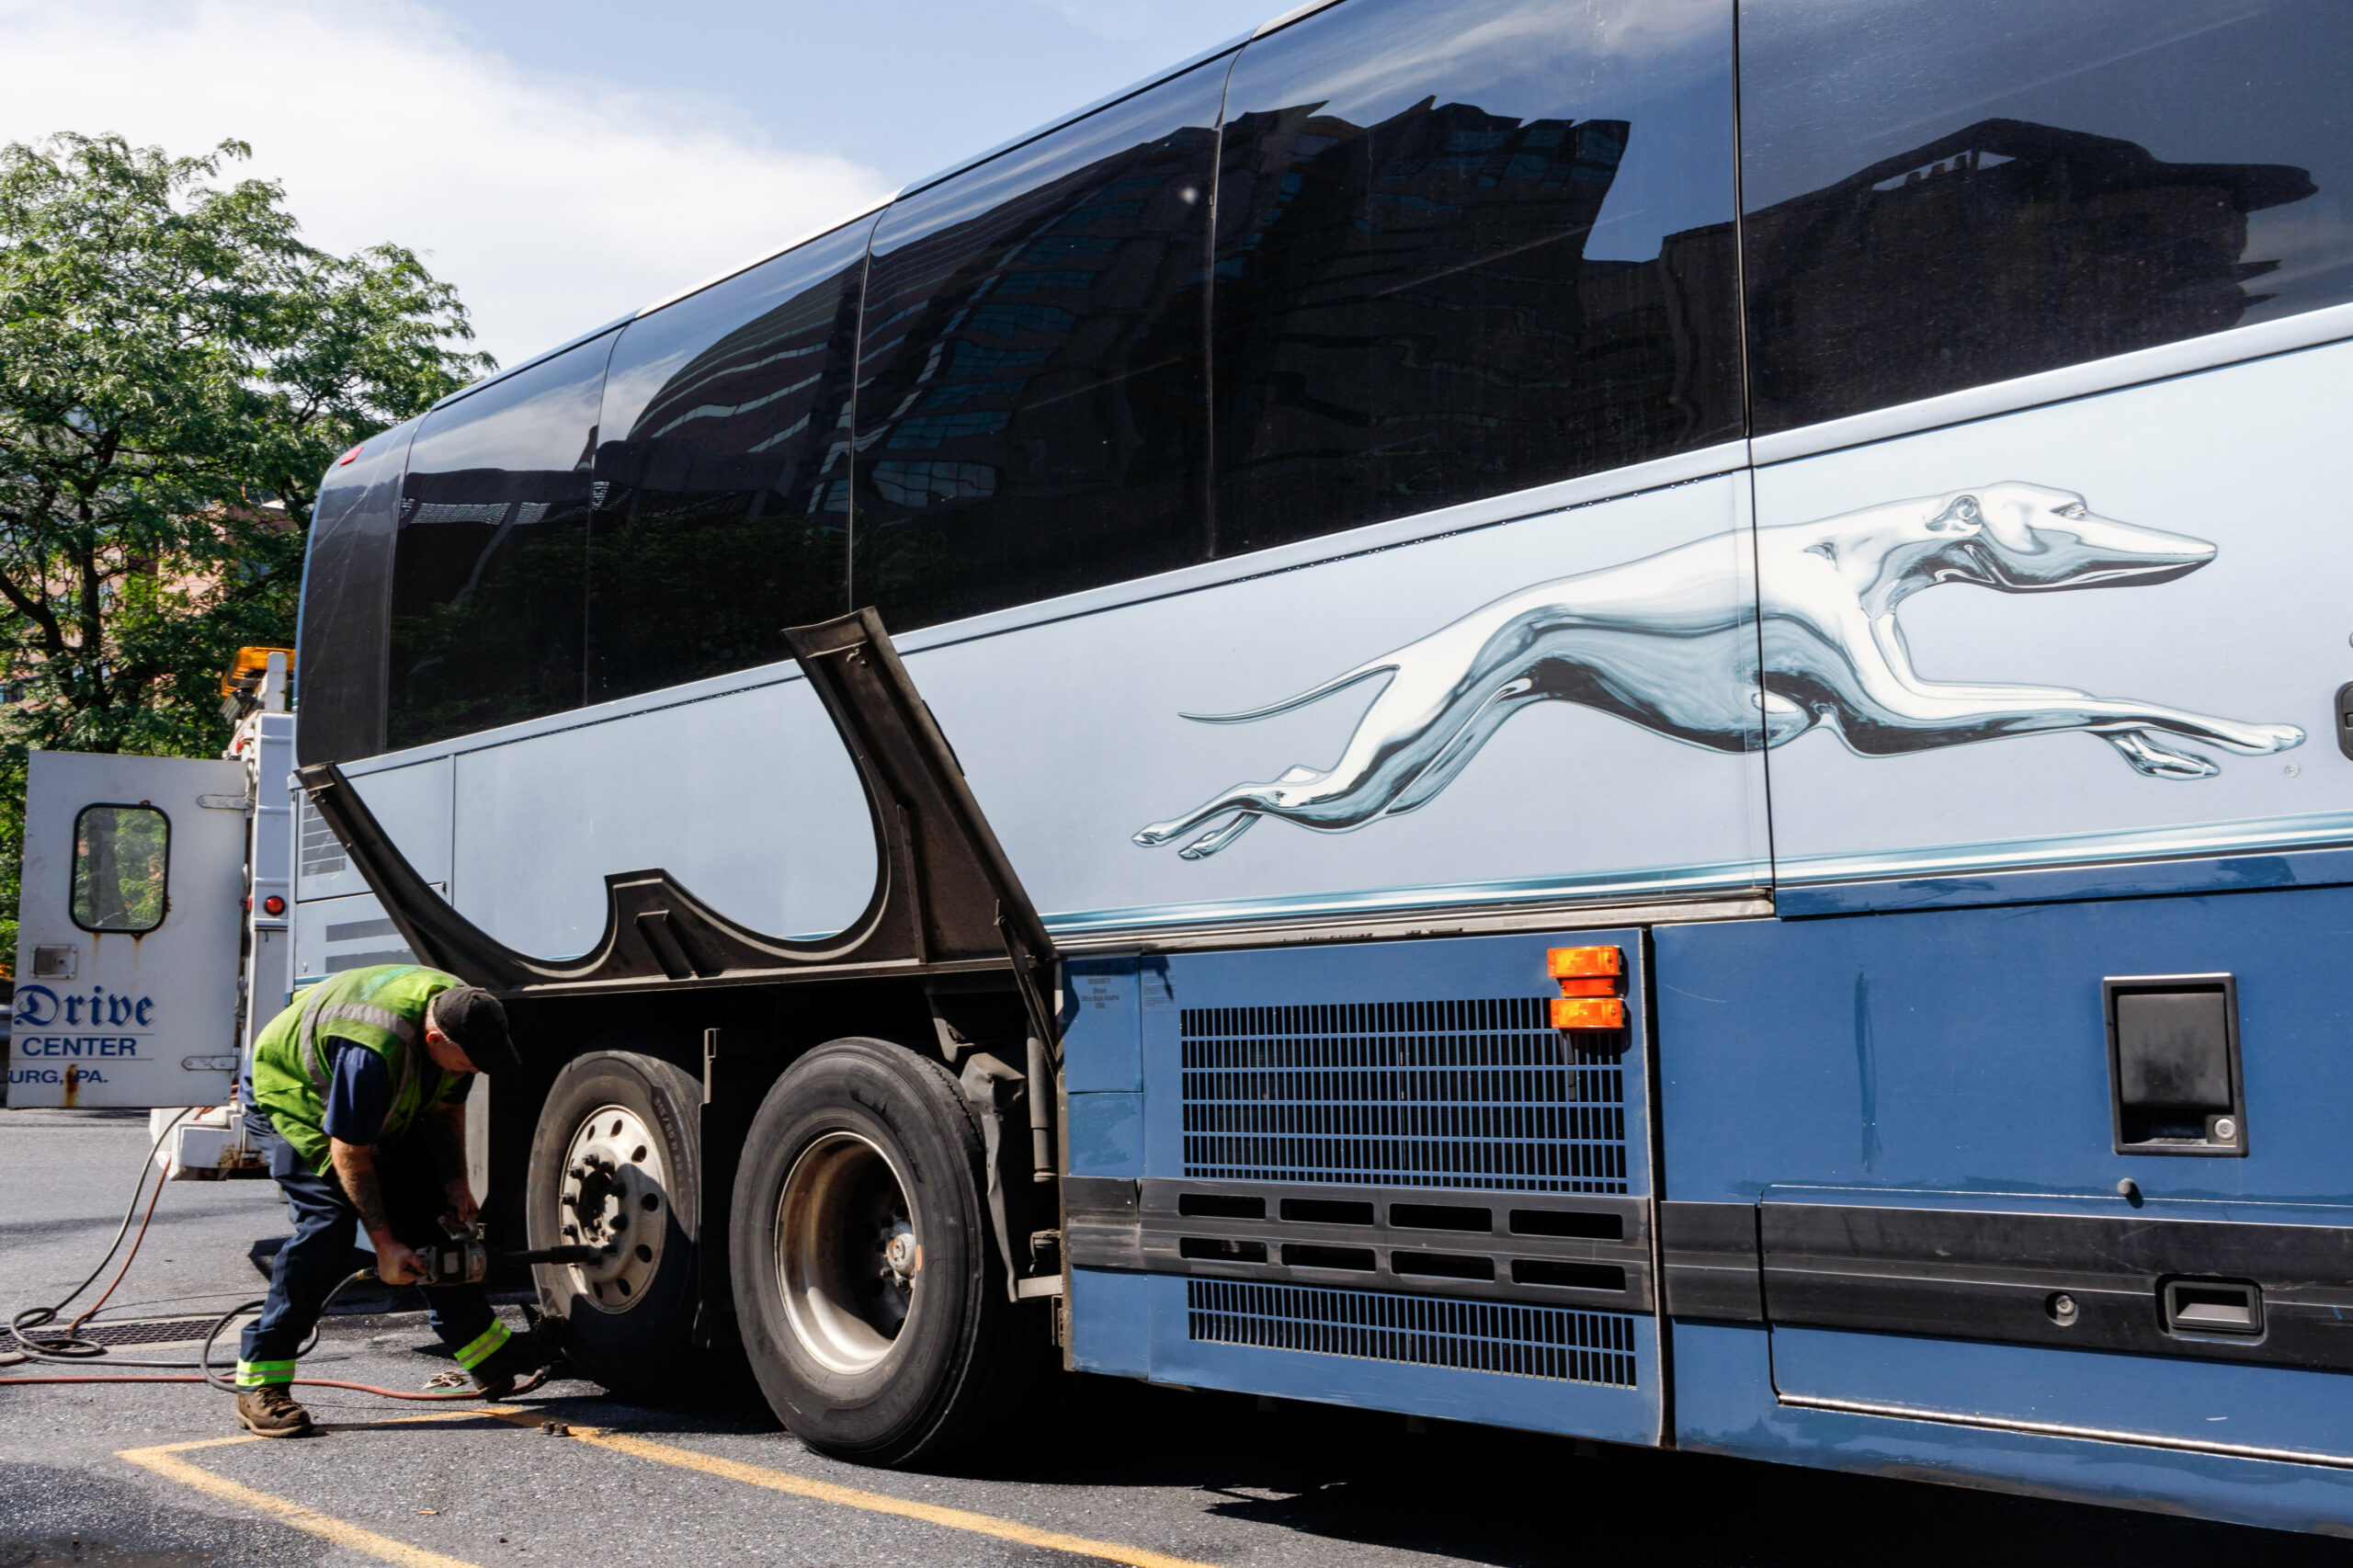 What’s next for bus operator Greyhound post-pandemic